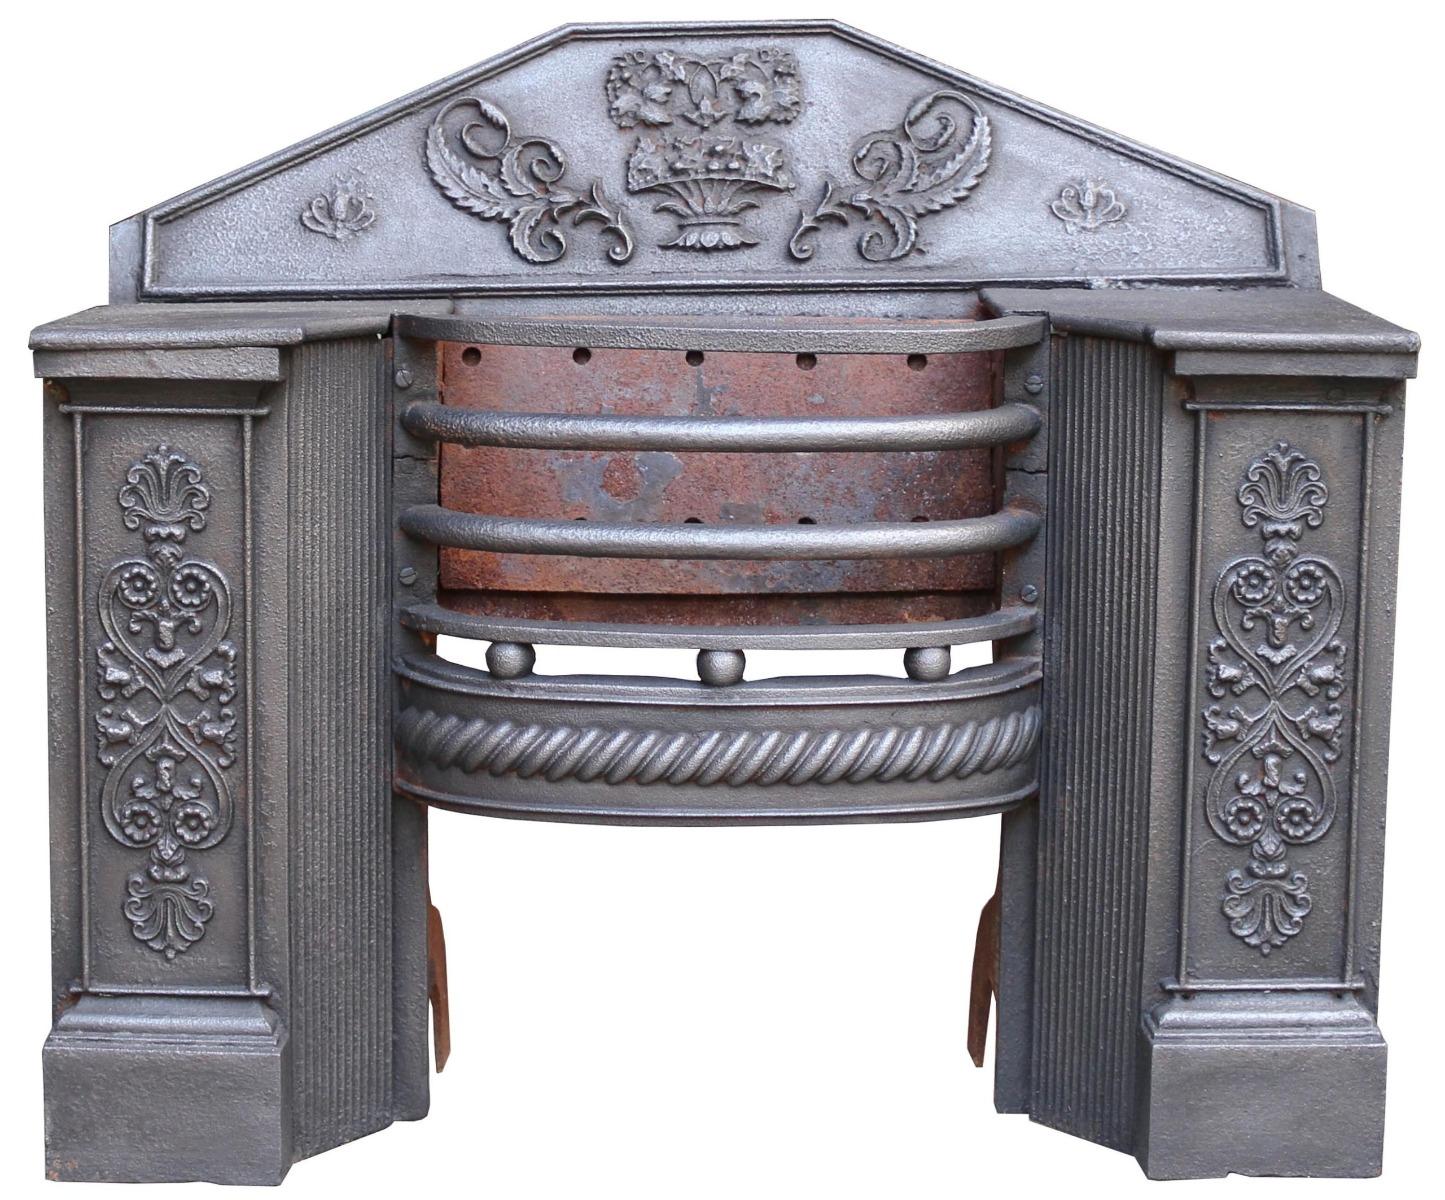 A Late George III Hob grate. Finished in black graphite polish.